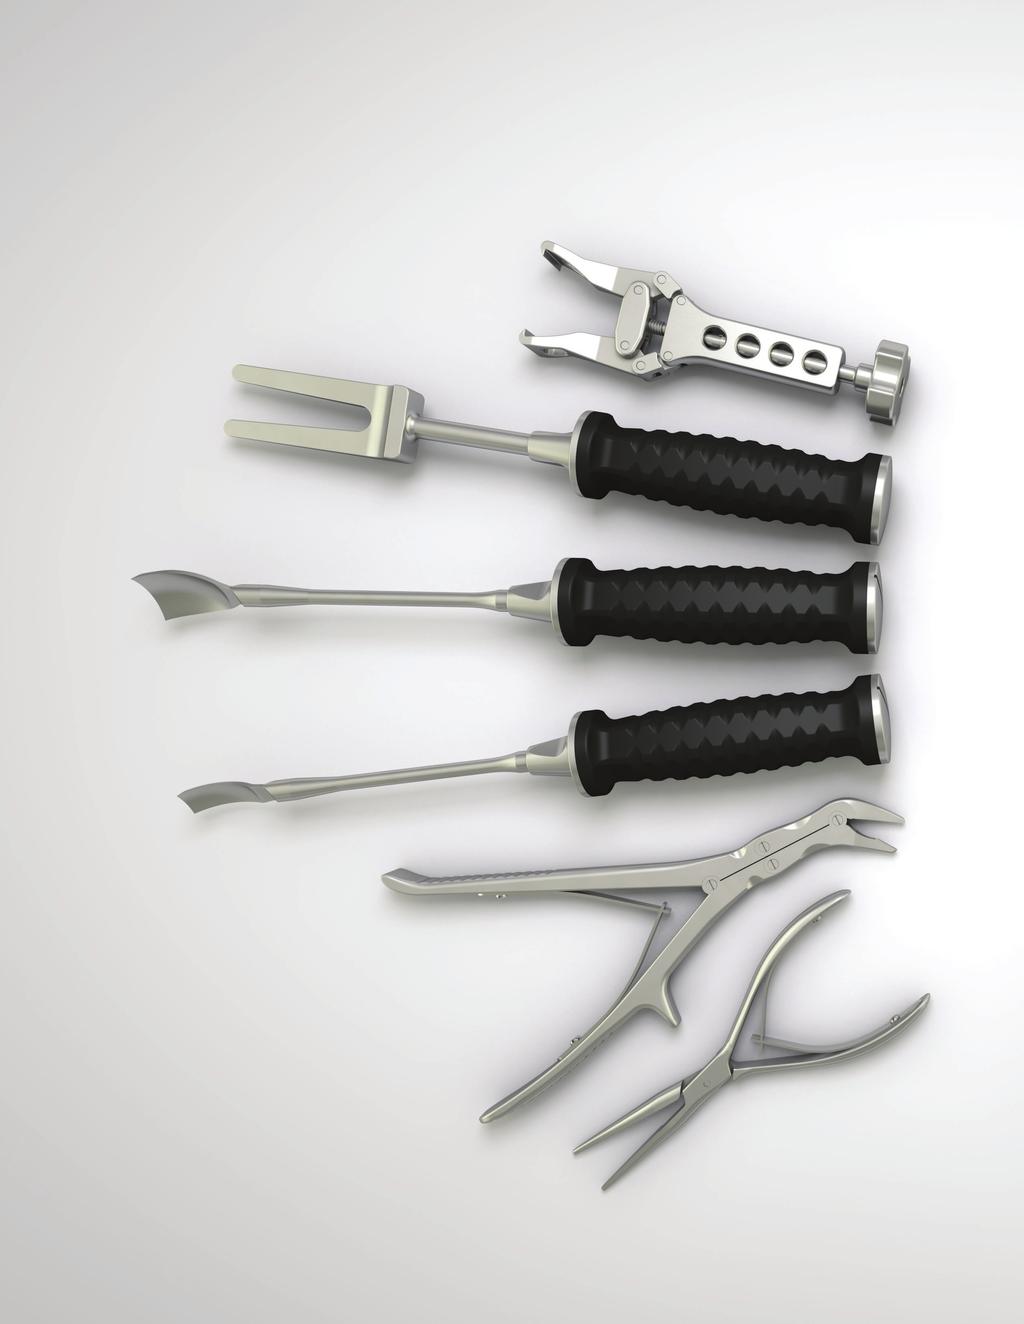 COMPONENT REMOVAL AND UTILITY Head Extractor May be used in the removal of humeral head components. Head Removal Fork Aids in the removal of the humeral head components of anatomic prosthesis.